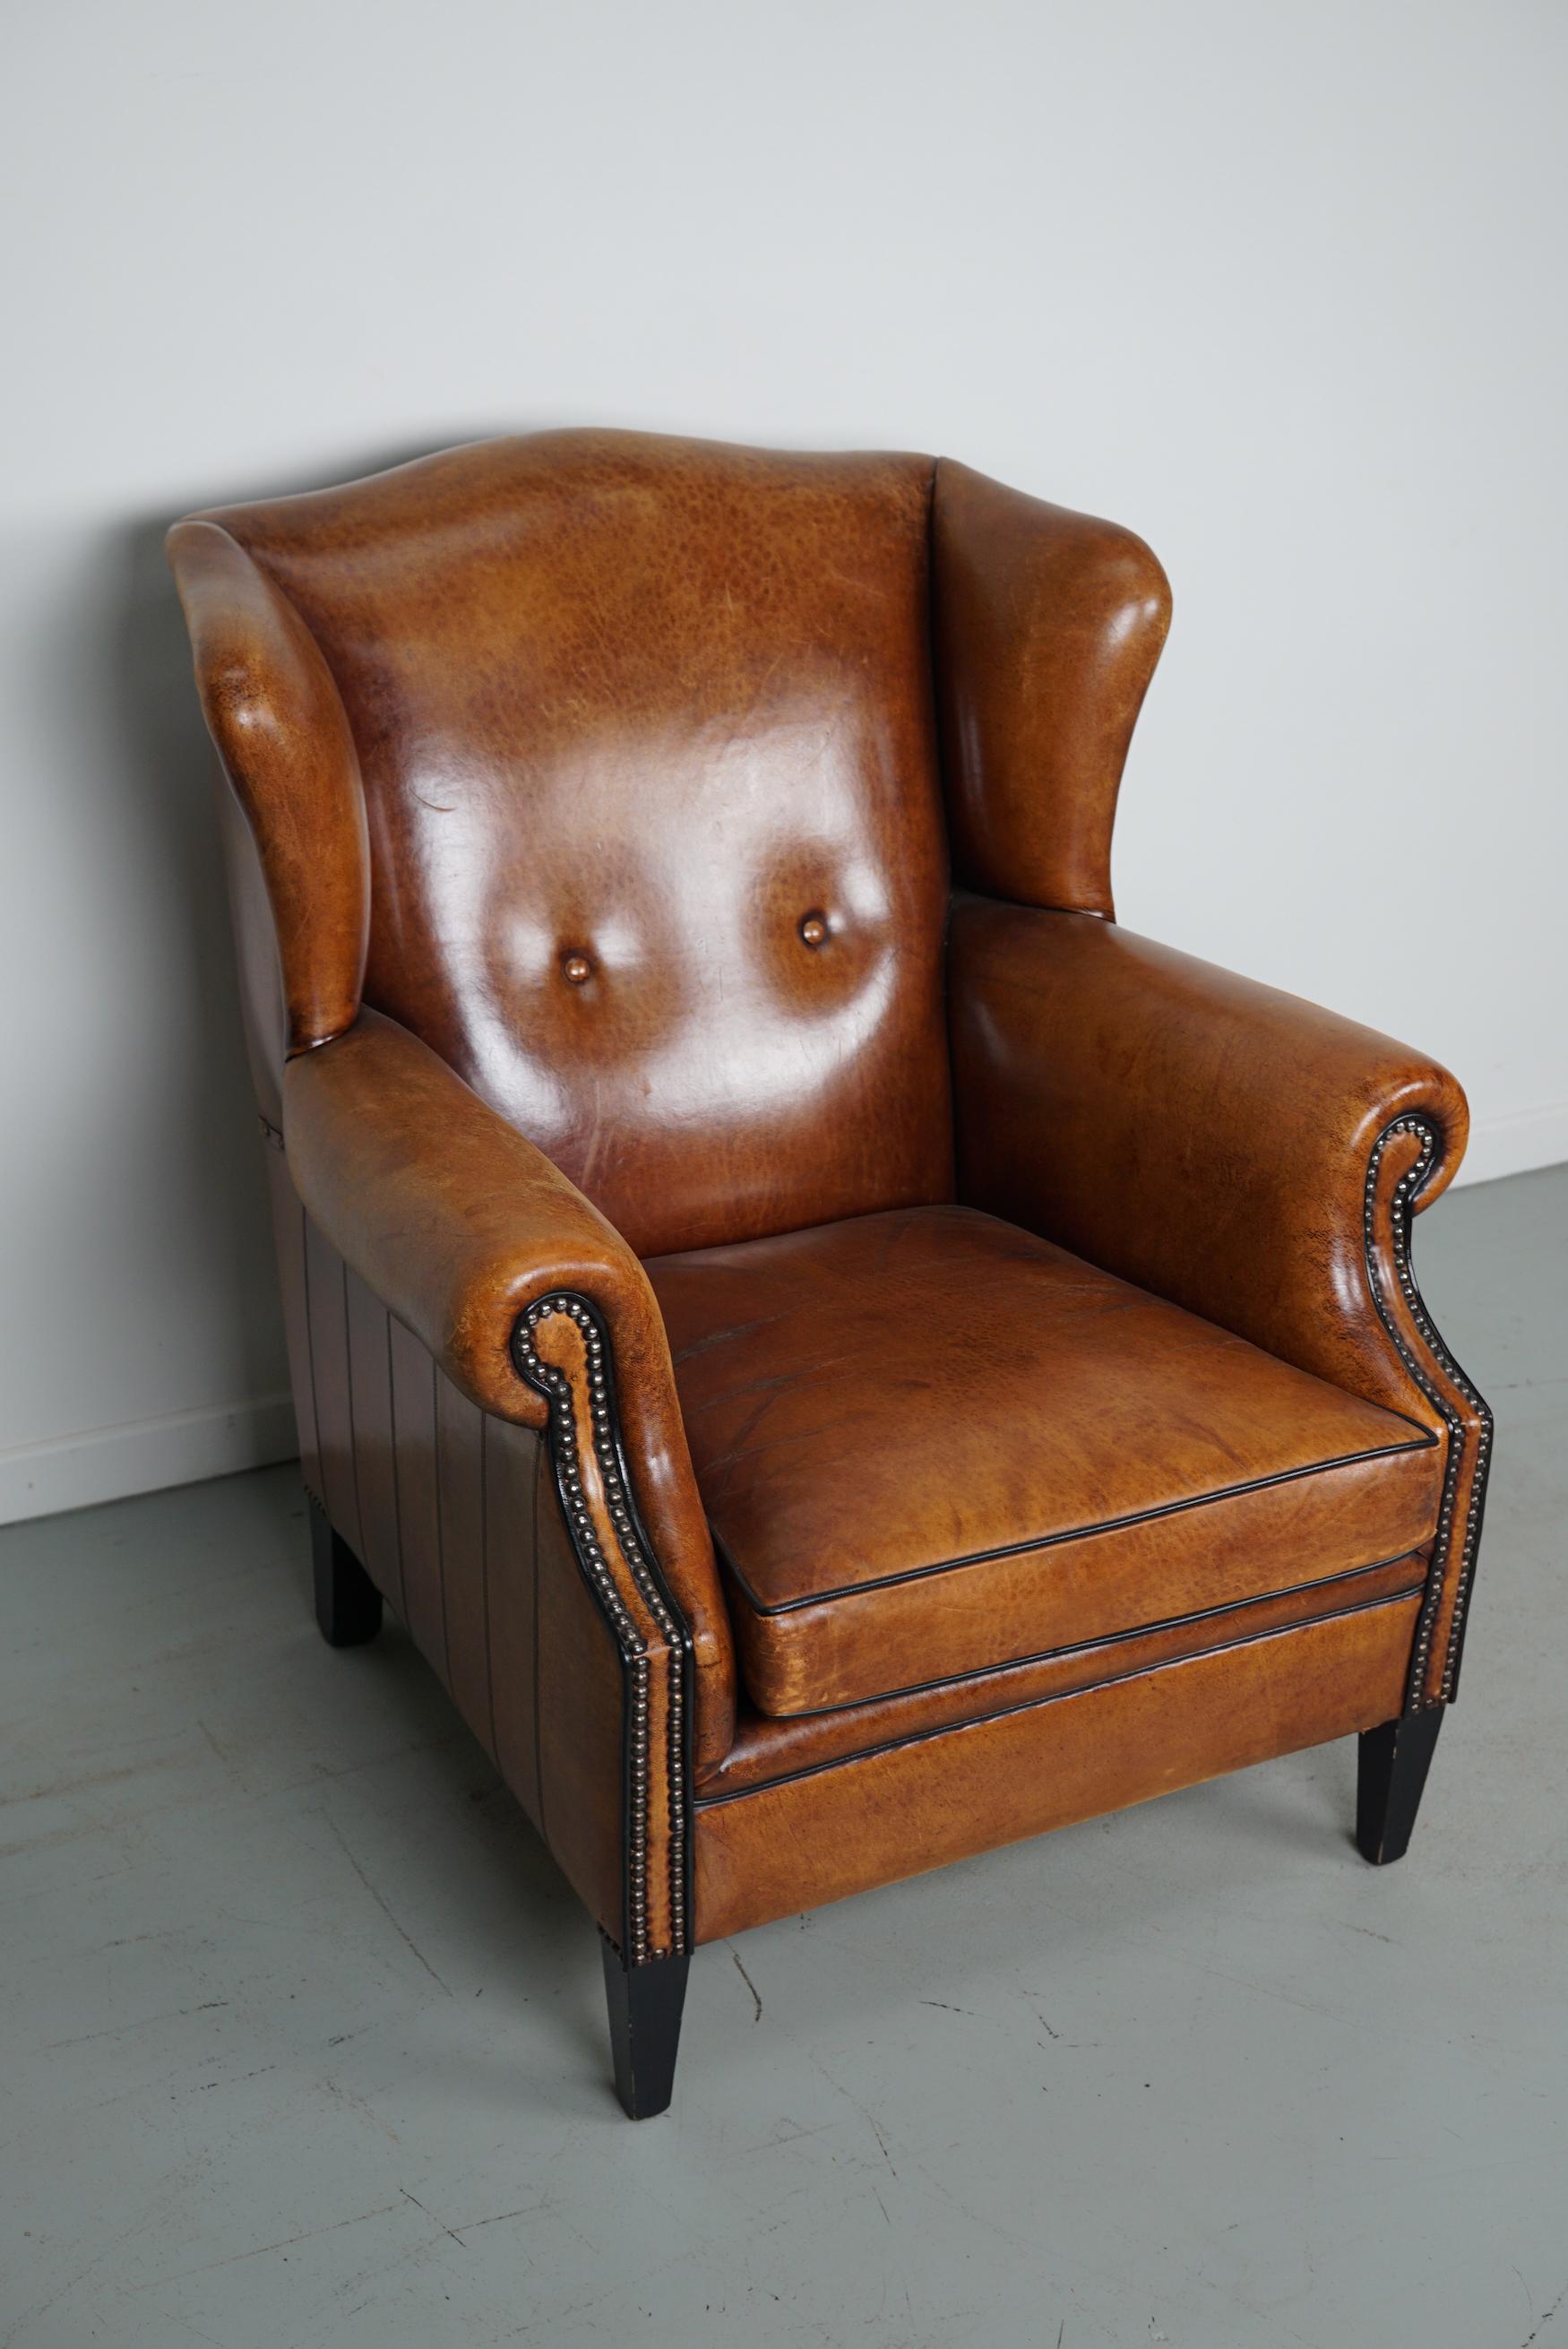 This cognac-colored leather club chair comes from the Netherlands. It is upholstered with cognac-colored leather and features black piping and wooden legs.